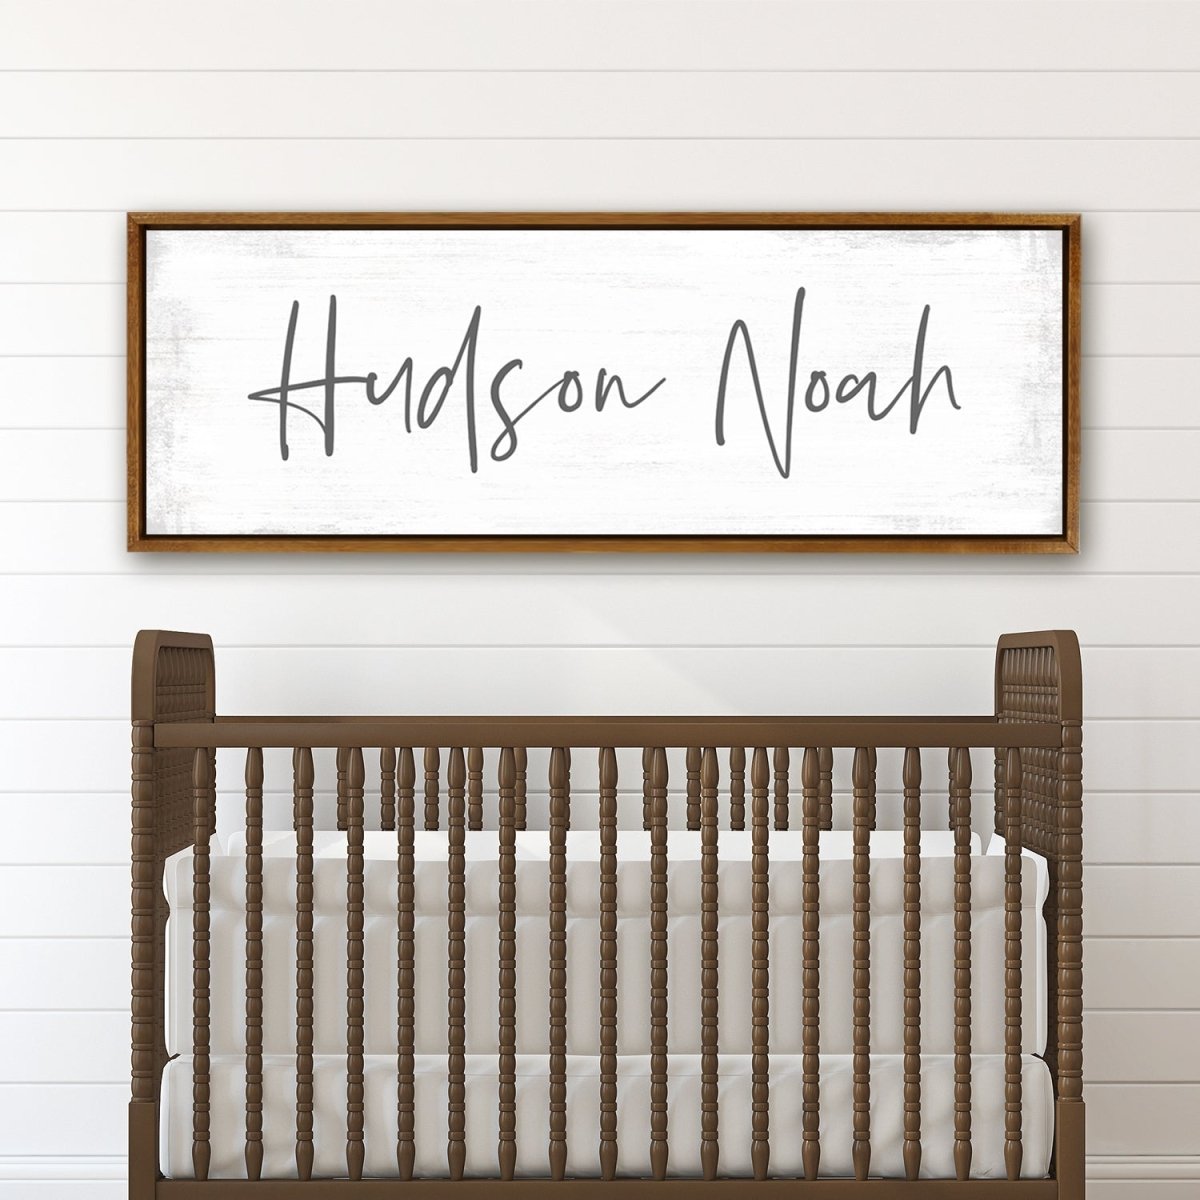 Personalized Baby Name Sign Hanging on Wall Above Baby Crib - Pretty Perfect Studio